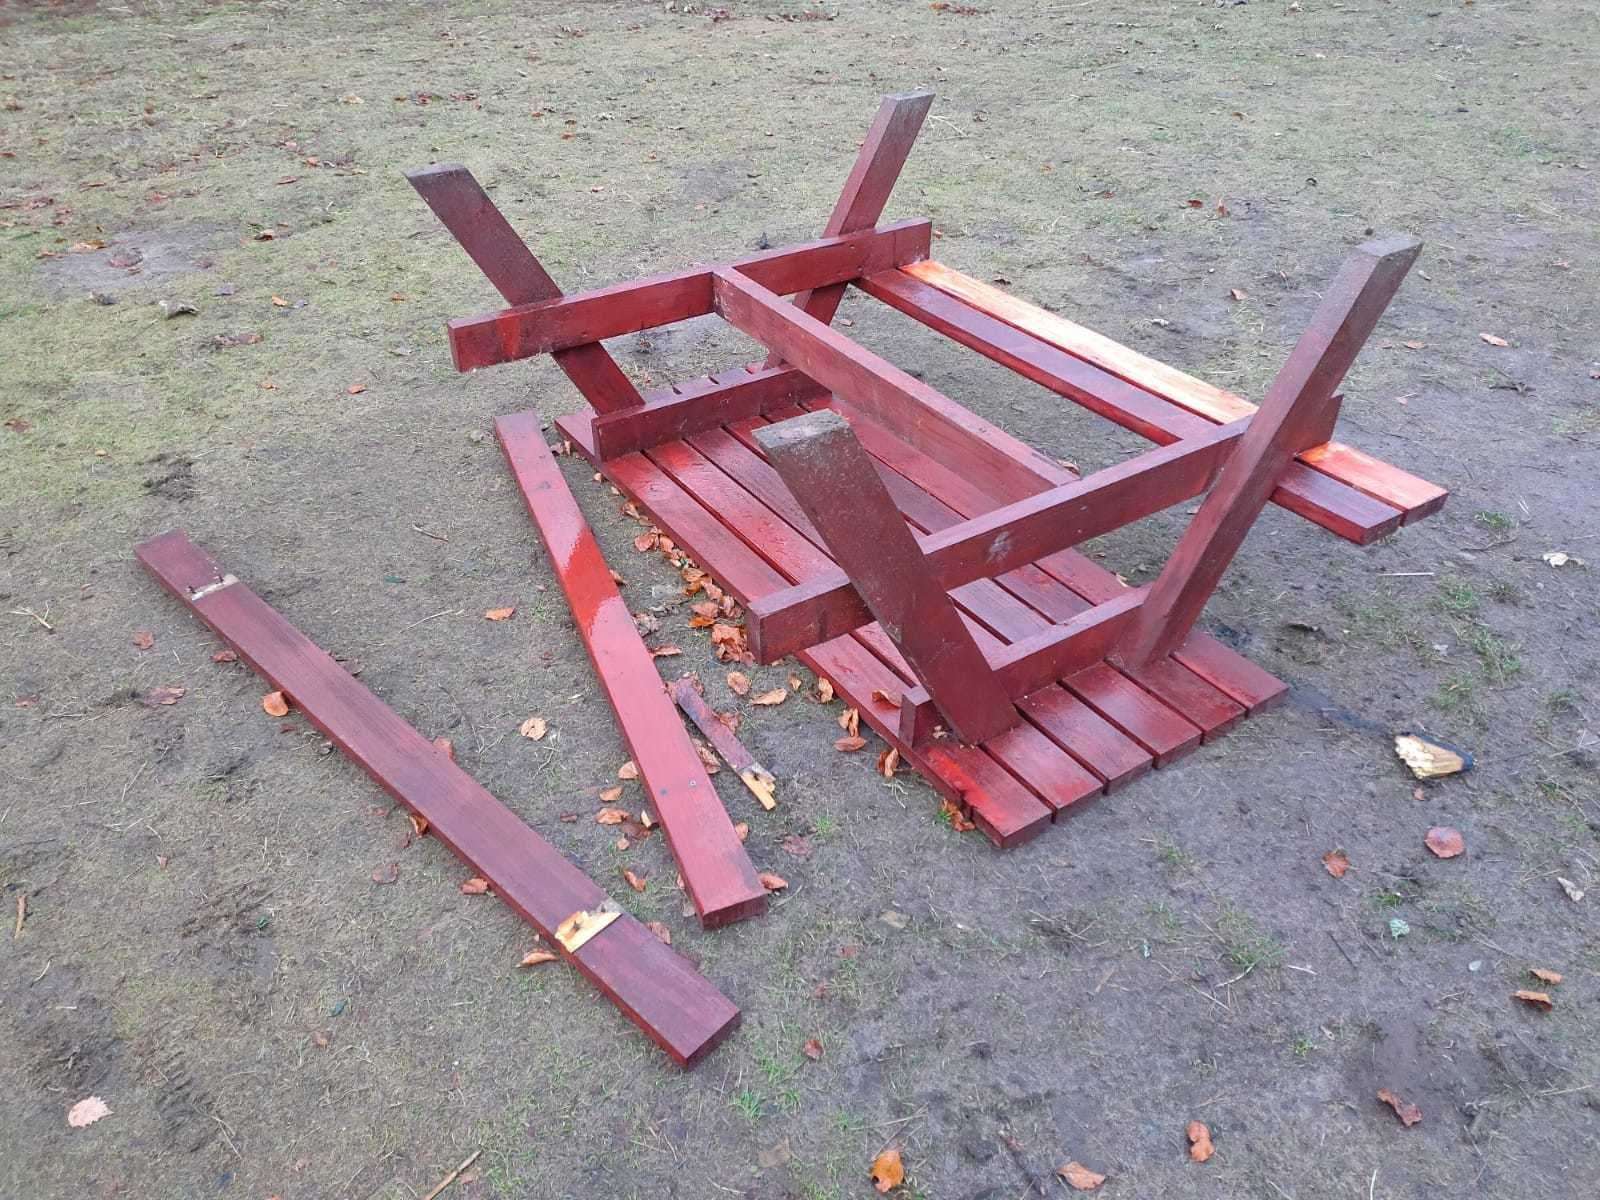 A bench was smashed during one bout of vandalism.